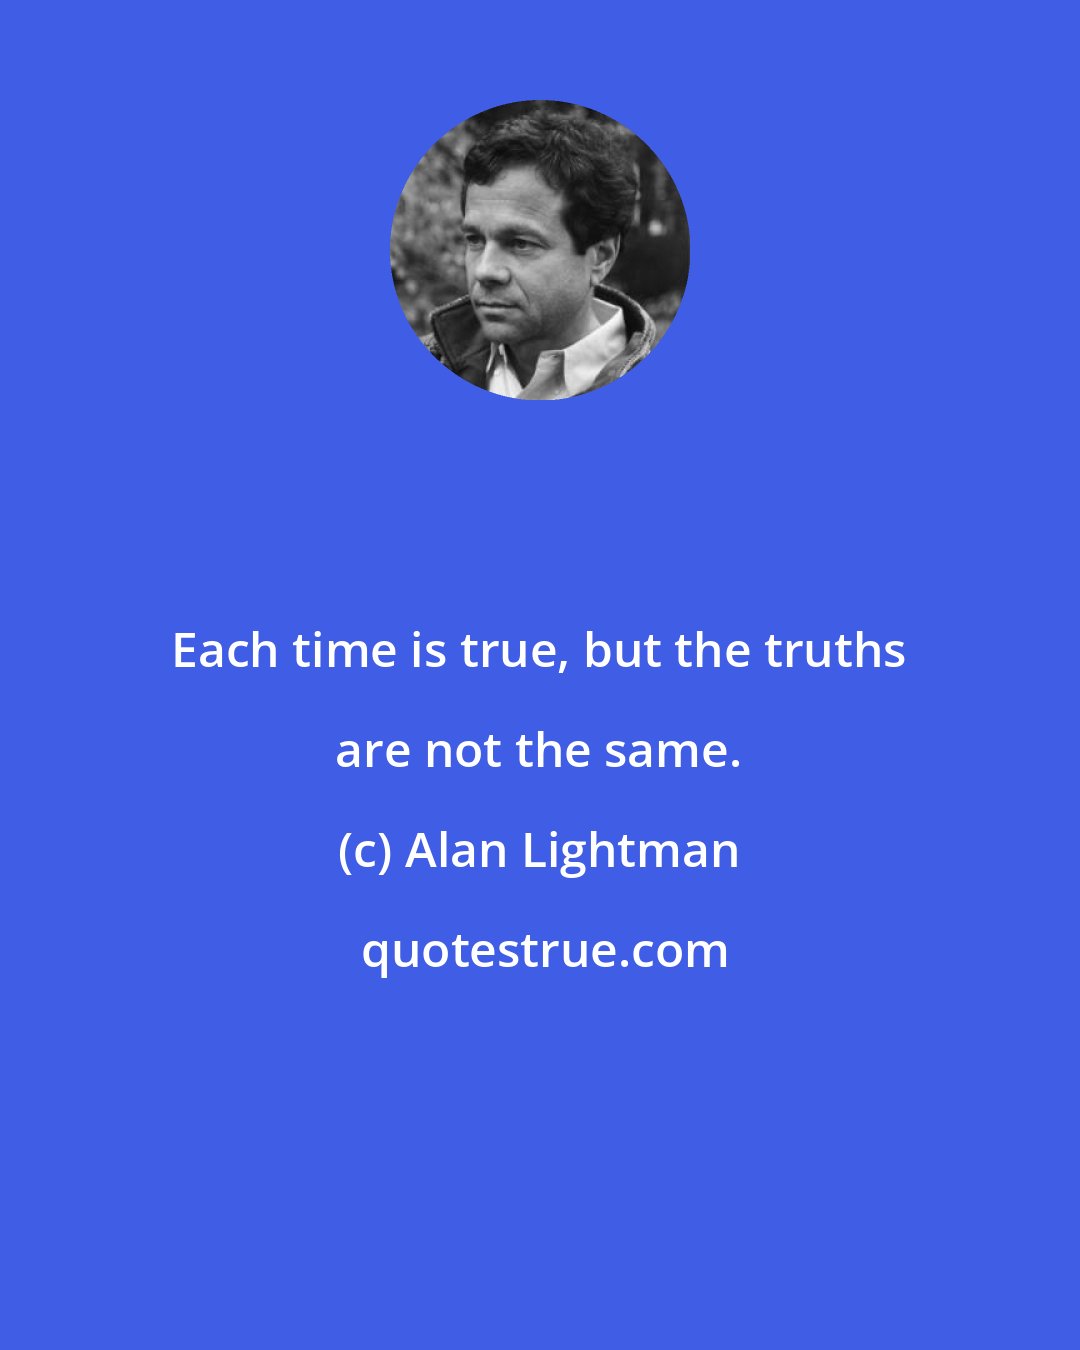 Alan Lightman: Each time is true, but the truths are not the same.